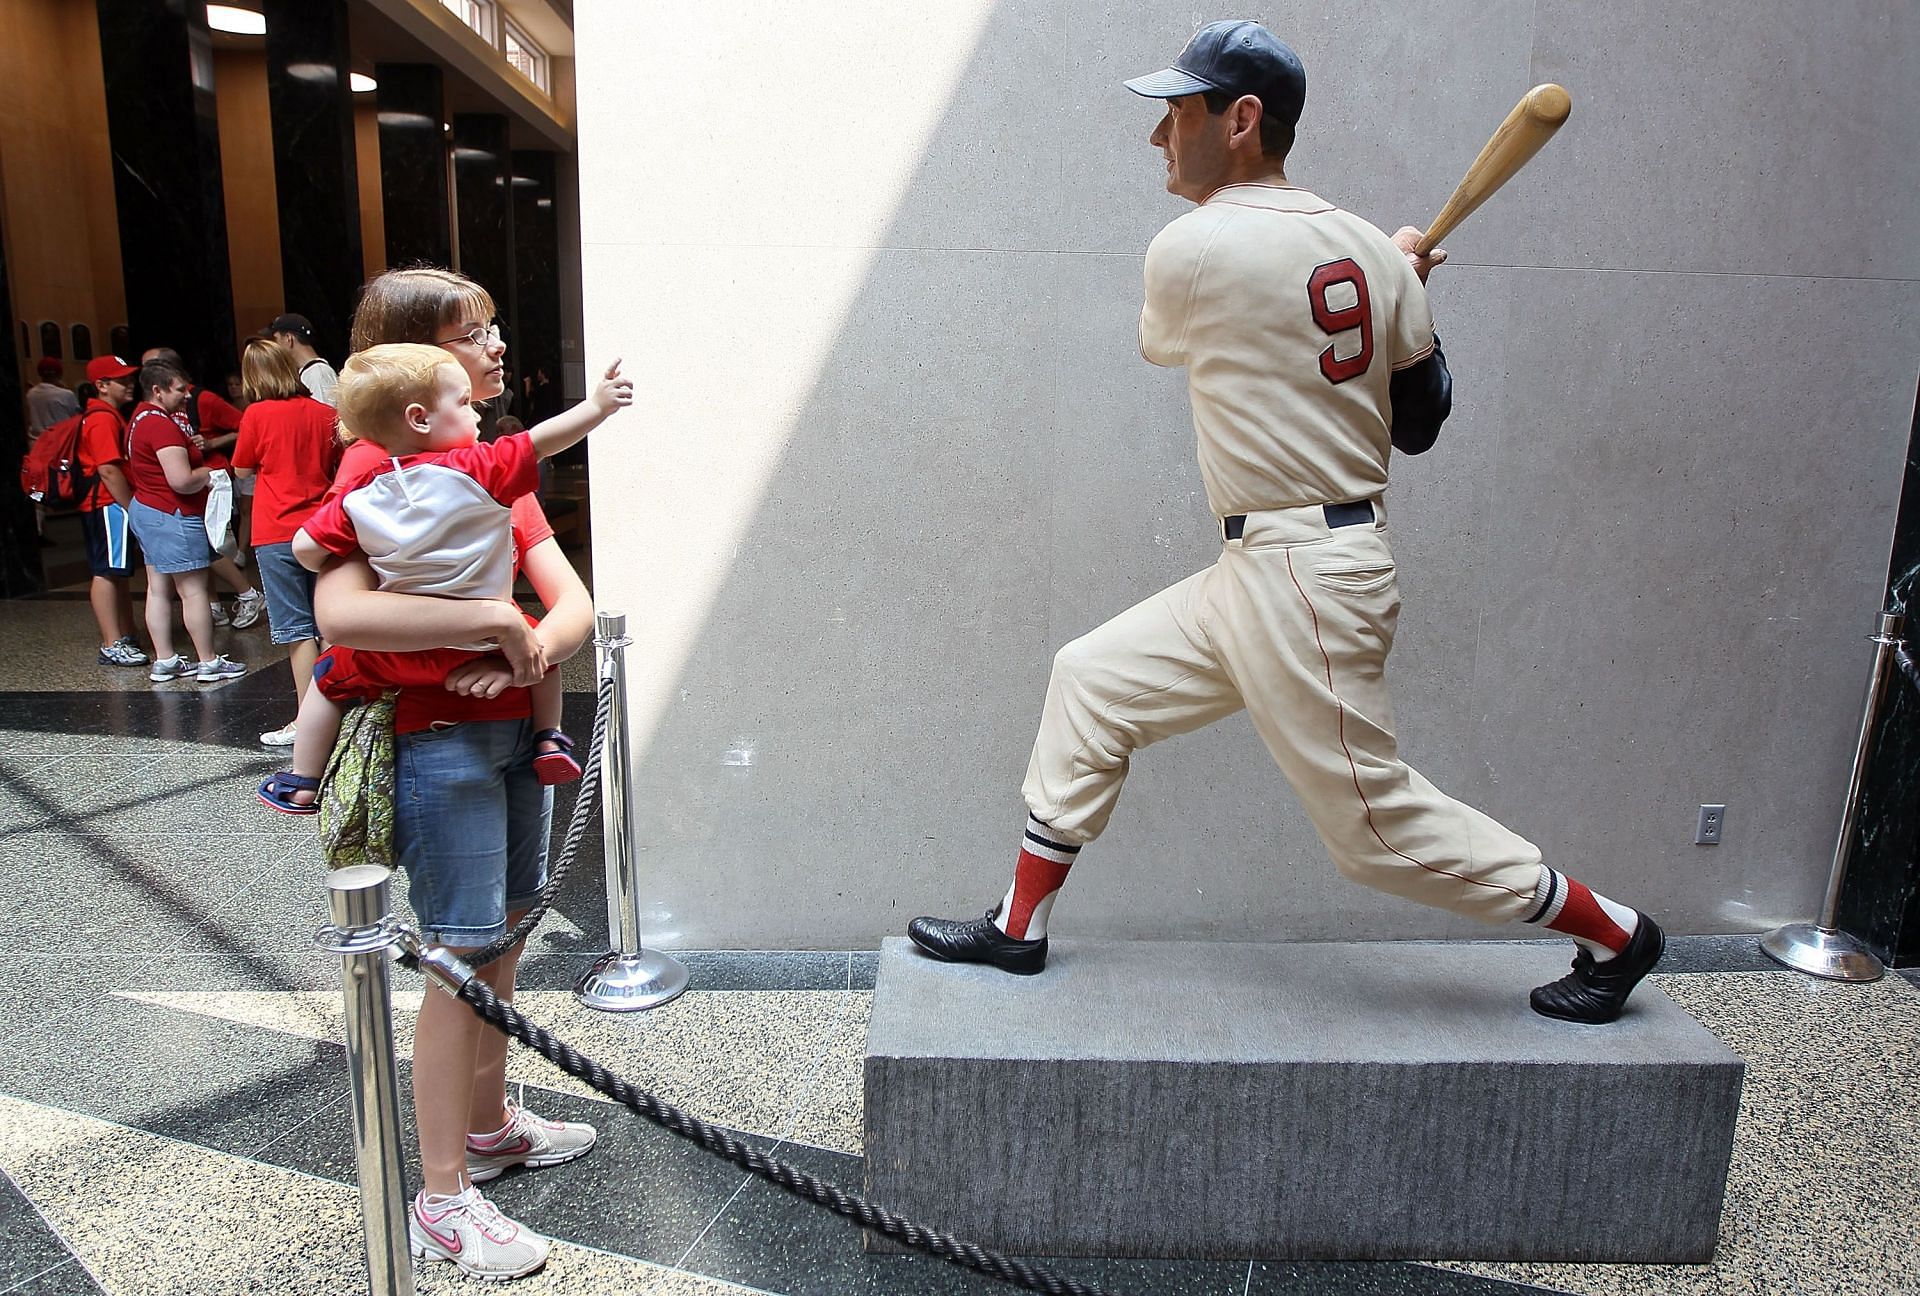 A statue of Ted Williams in the Baseball Hall Of Fame Museum